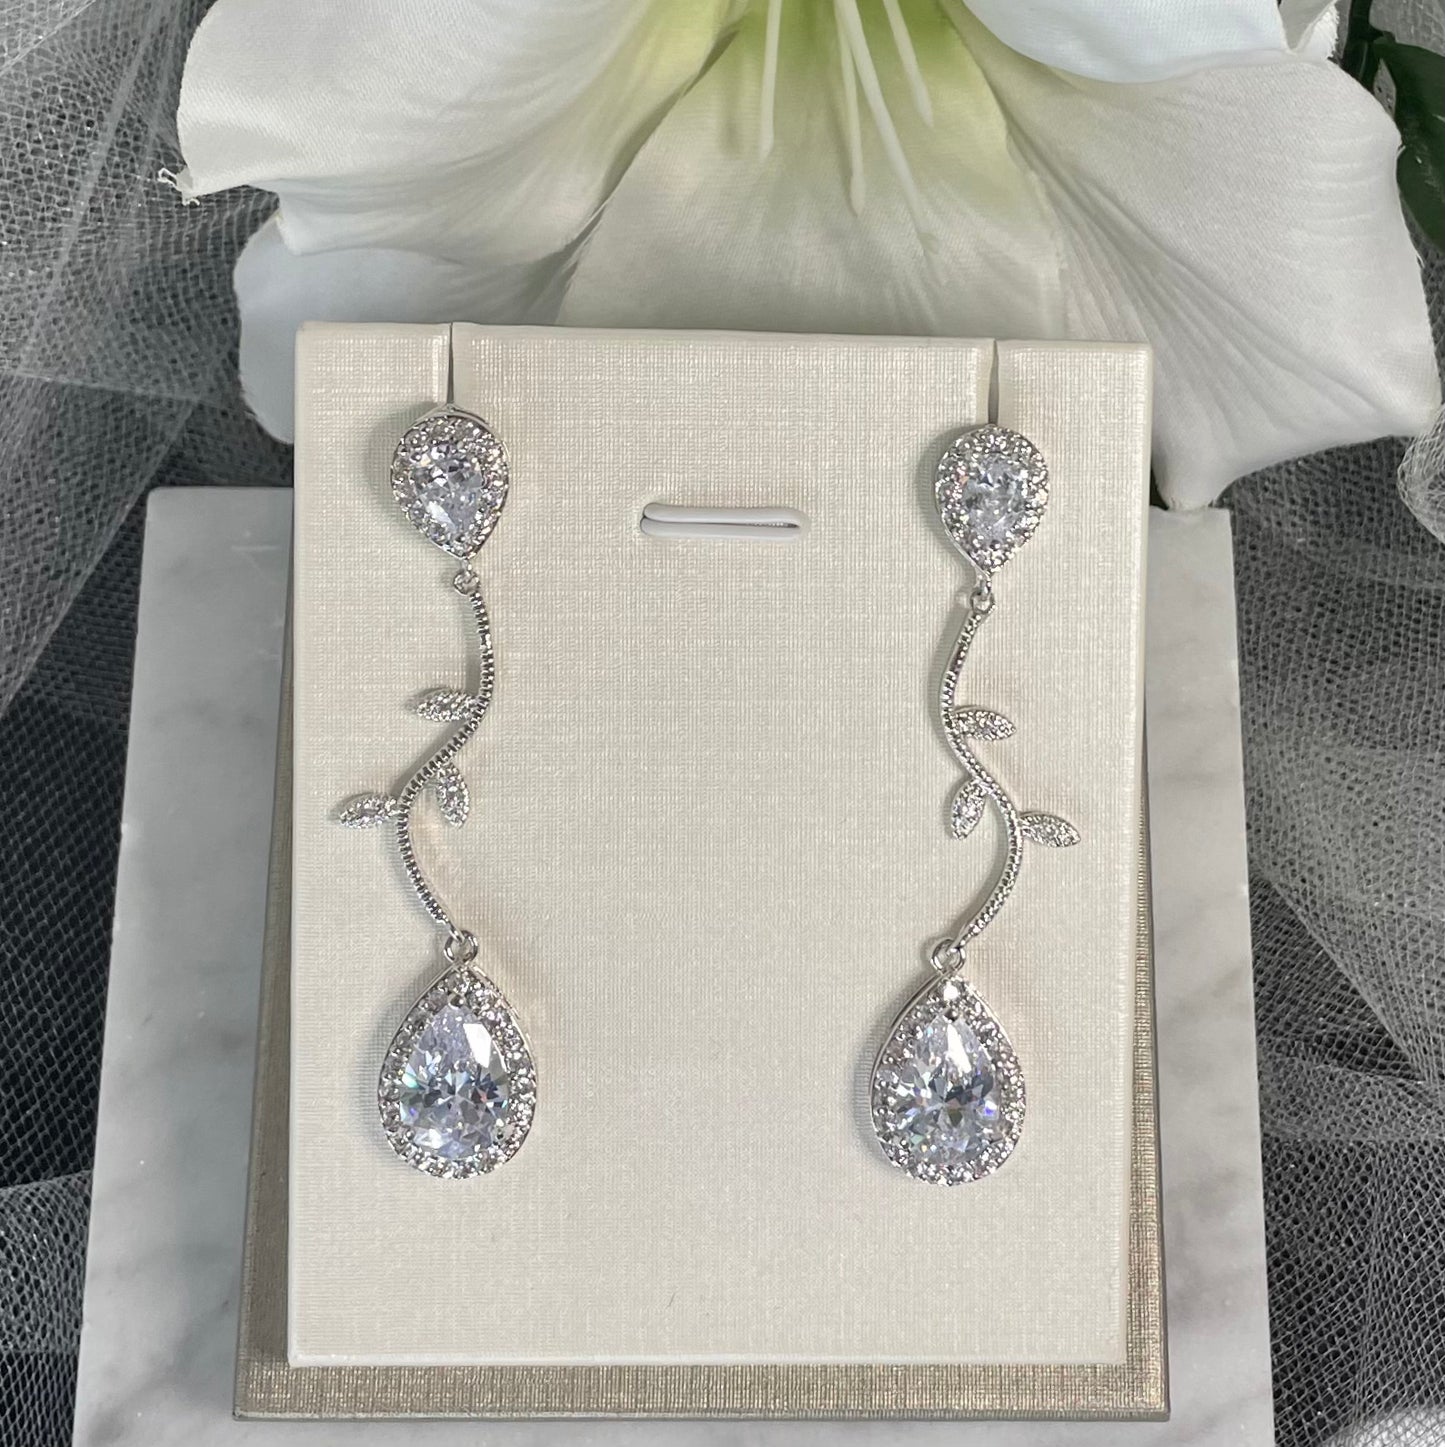 Katty Bridal Earrings with Leaf Crystal CZ and Water Drop Design - Divine Bridal